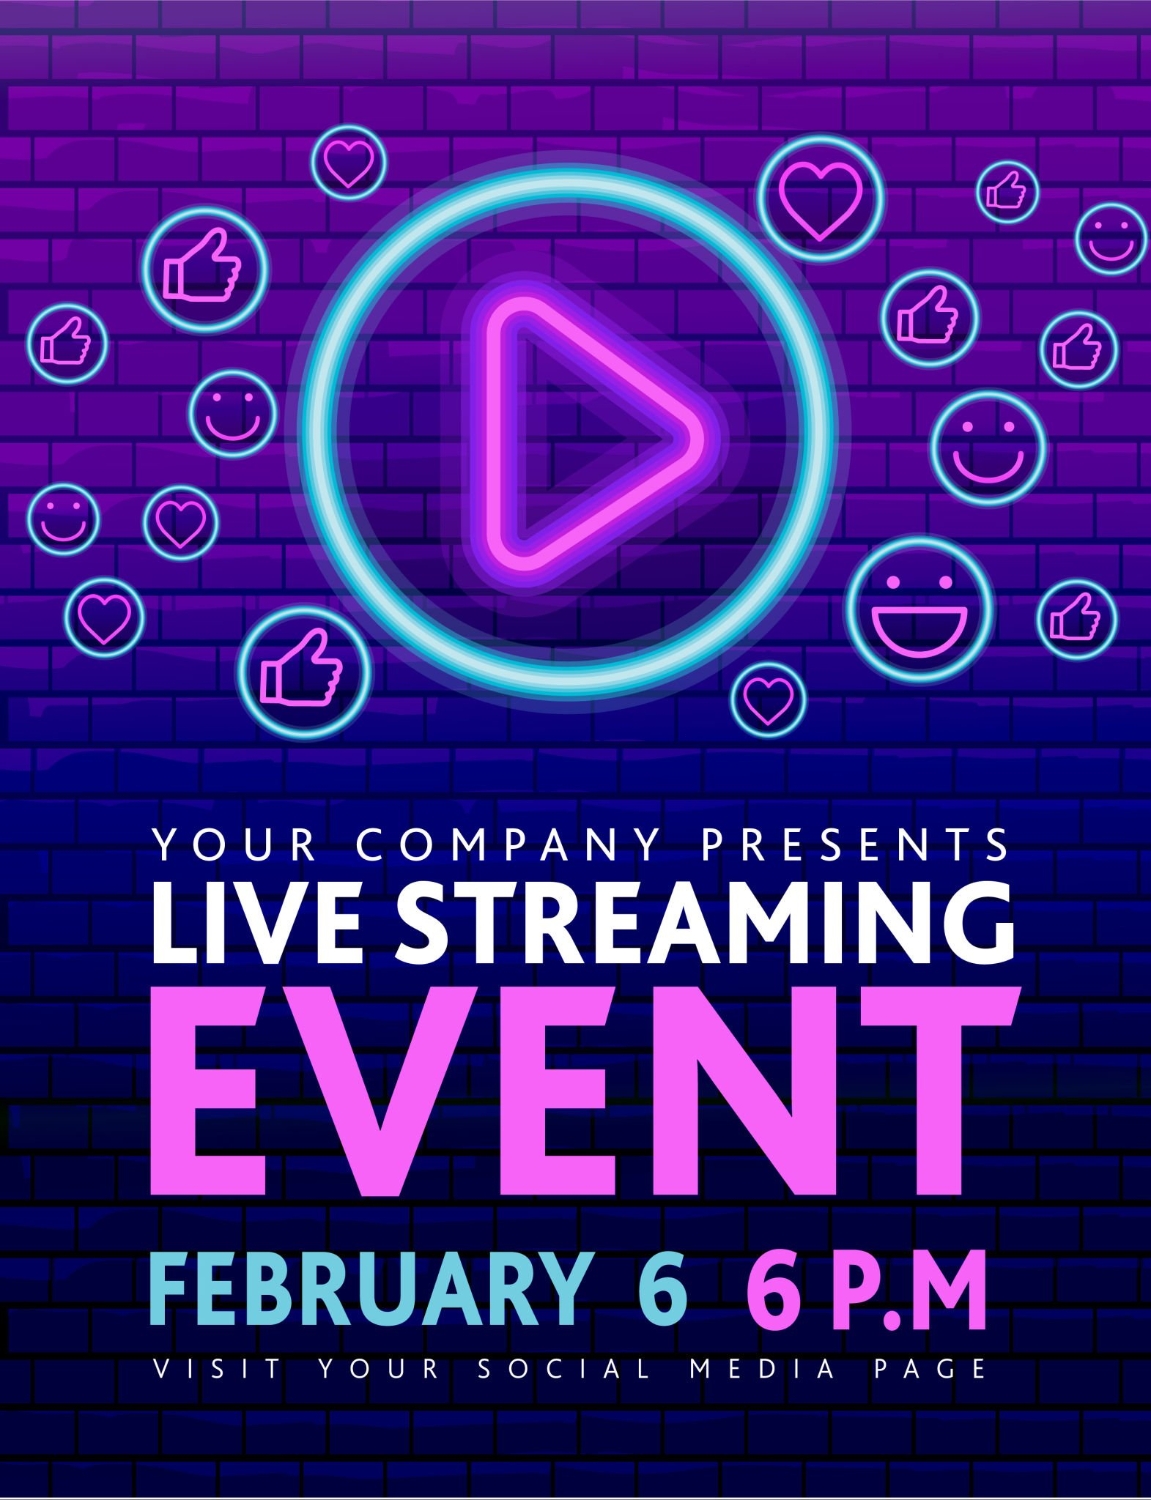 Live Streaming Event neon sign concert social media banner design with play button concept on purple brick wall